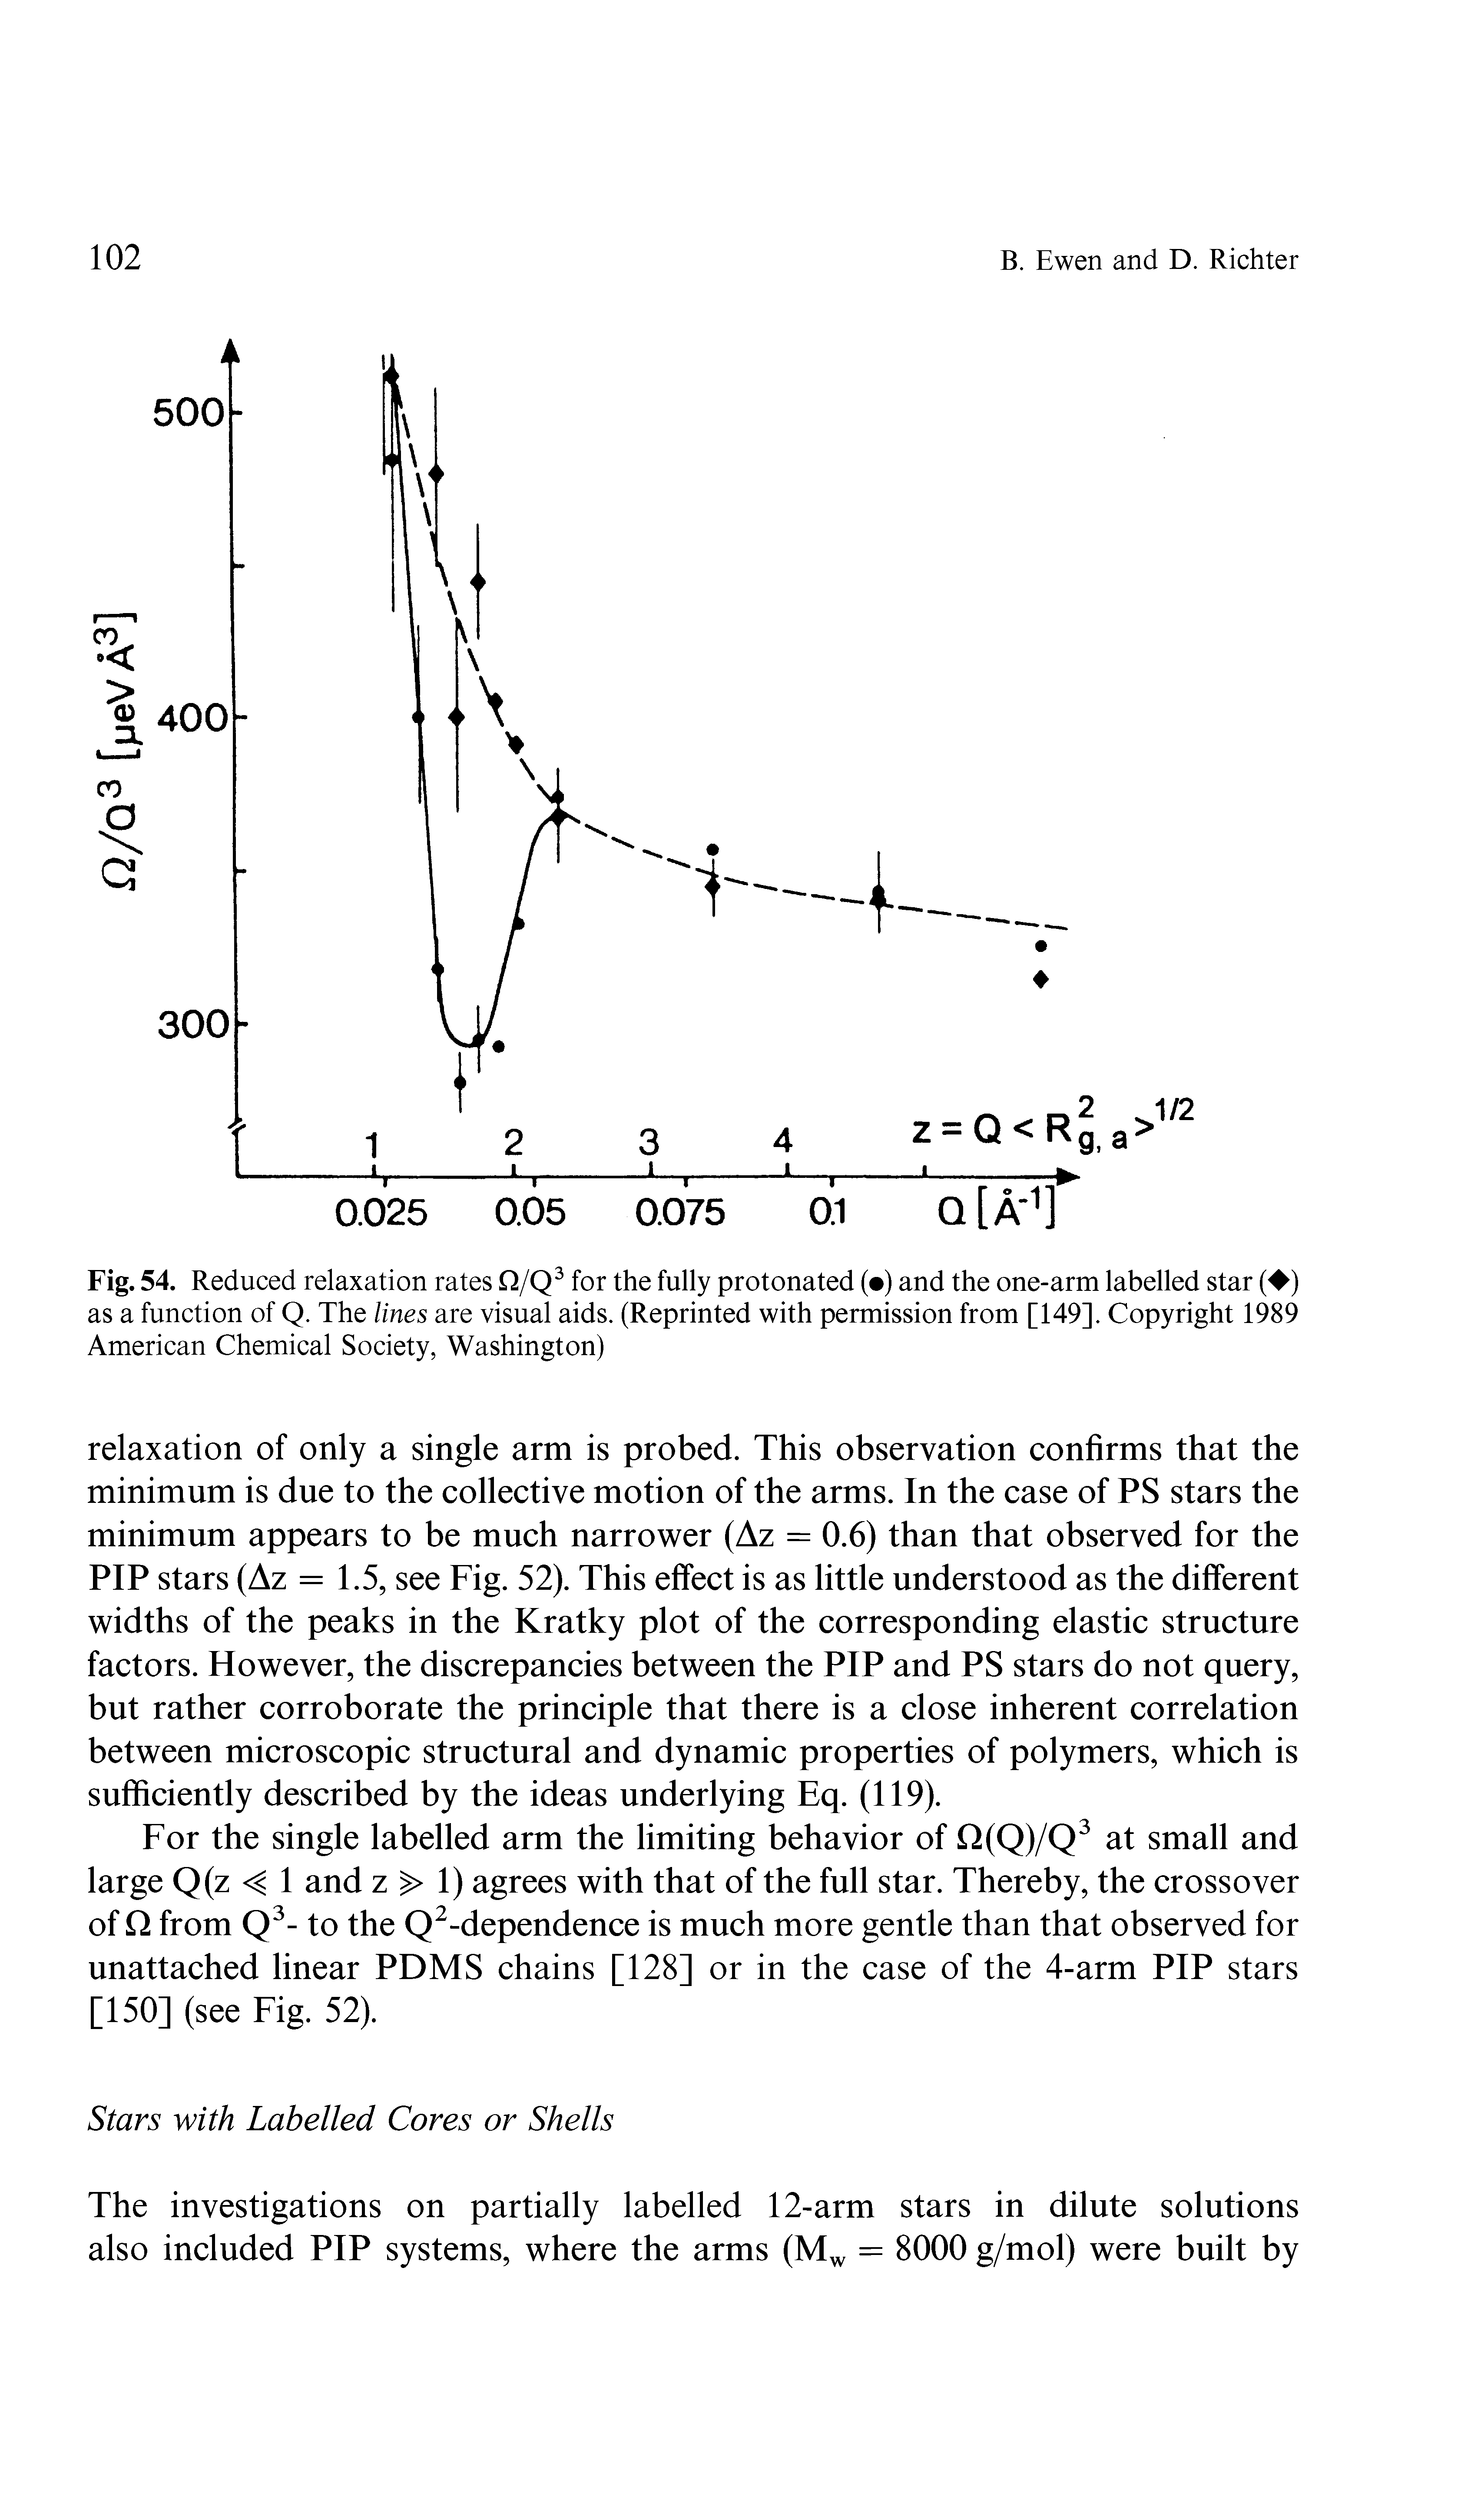 Fig. 54. Reduced relaxation rates Q/Q3 for the fully protonated ( ) and the one-arm labelled star ( ) as a function of Q. The lines are visual aids. (Reprinted with permission from [149]. Copyright 1989 American Chemical Society, Washington)...